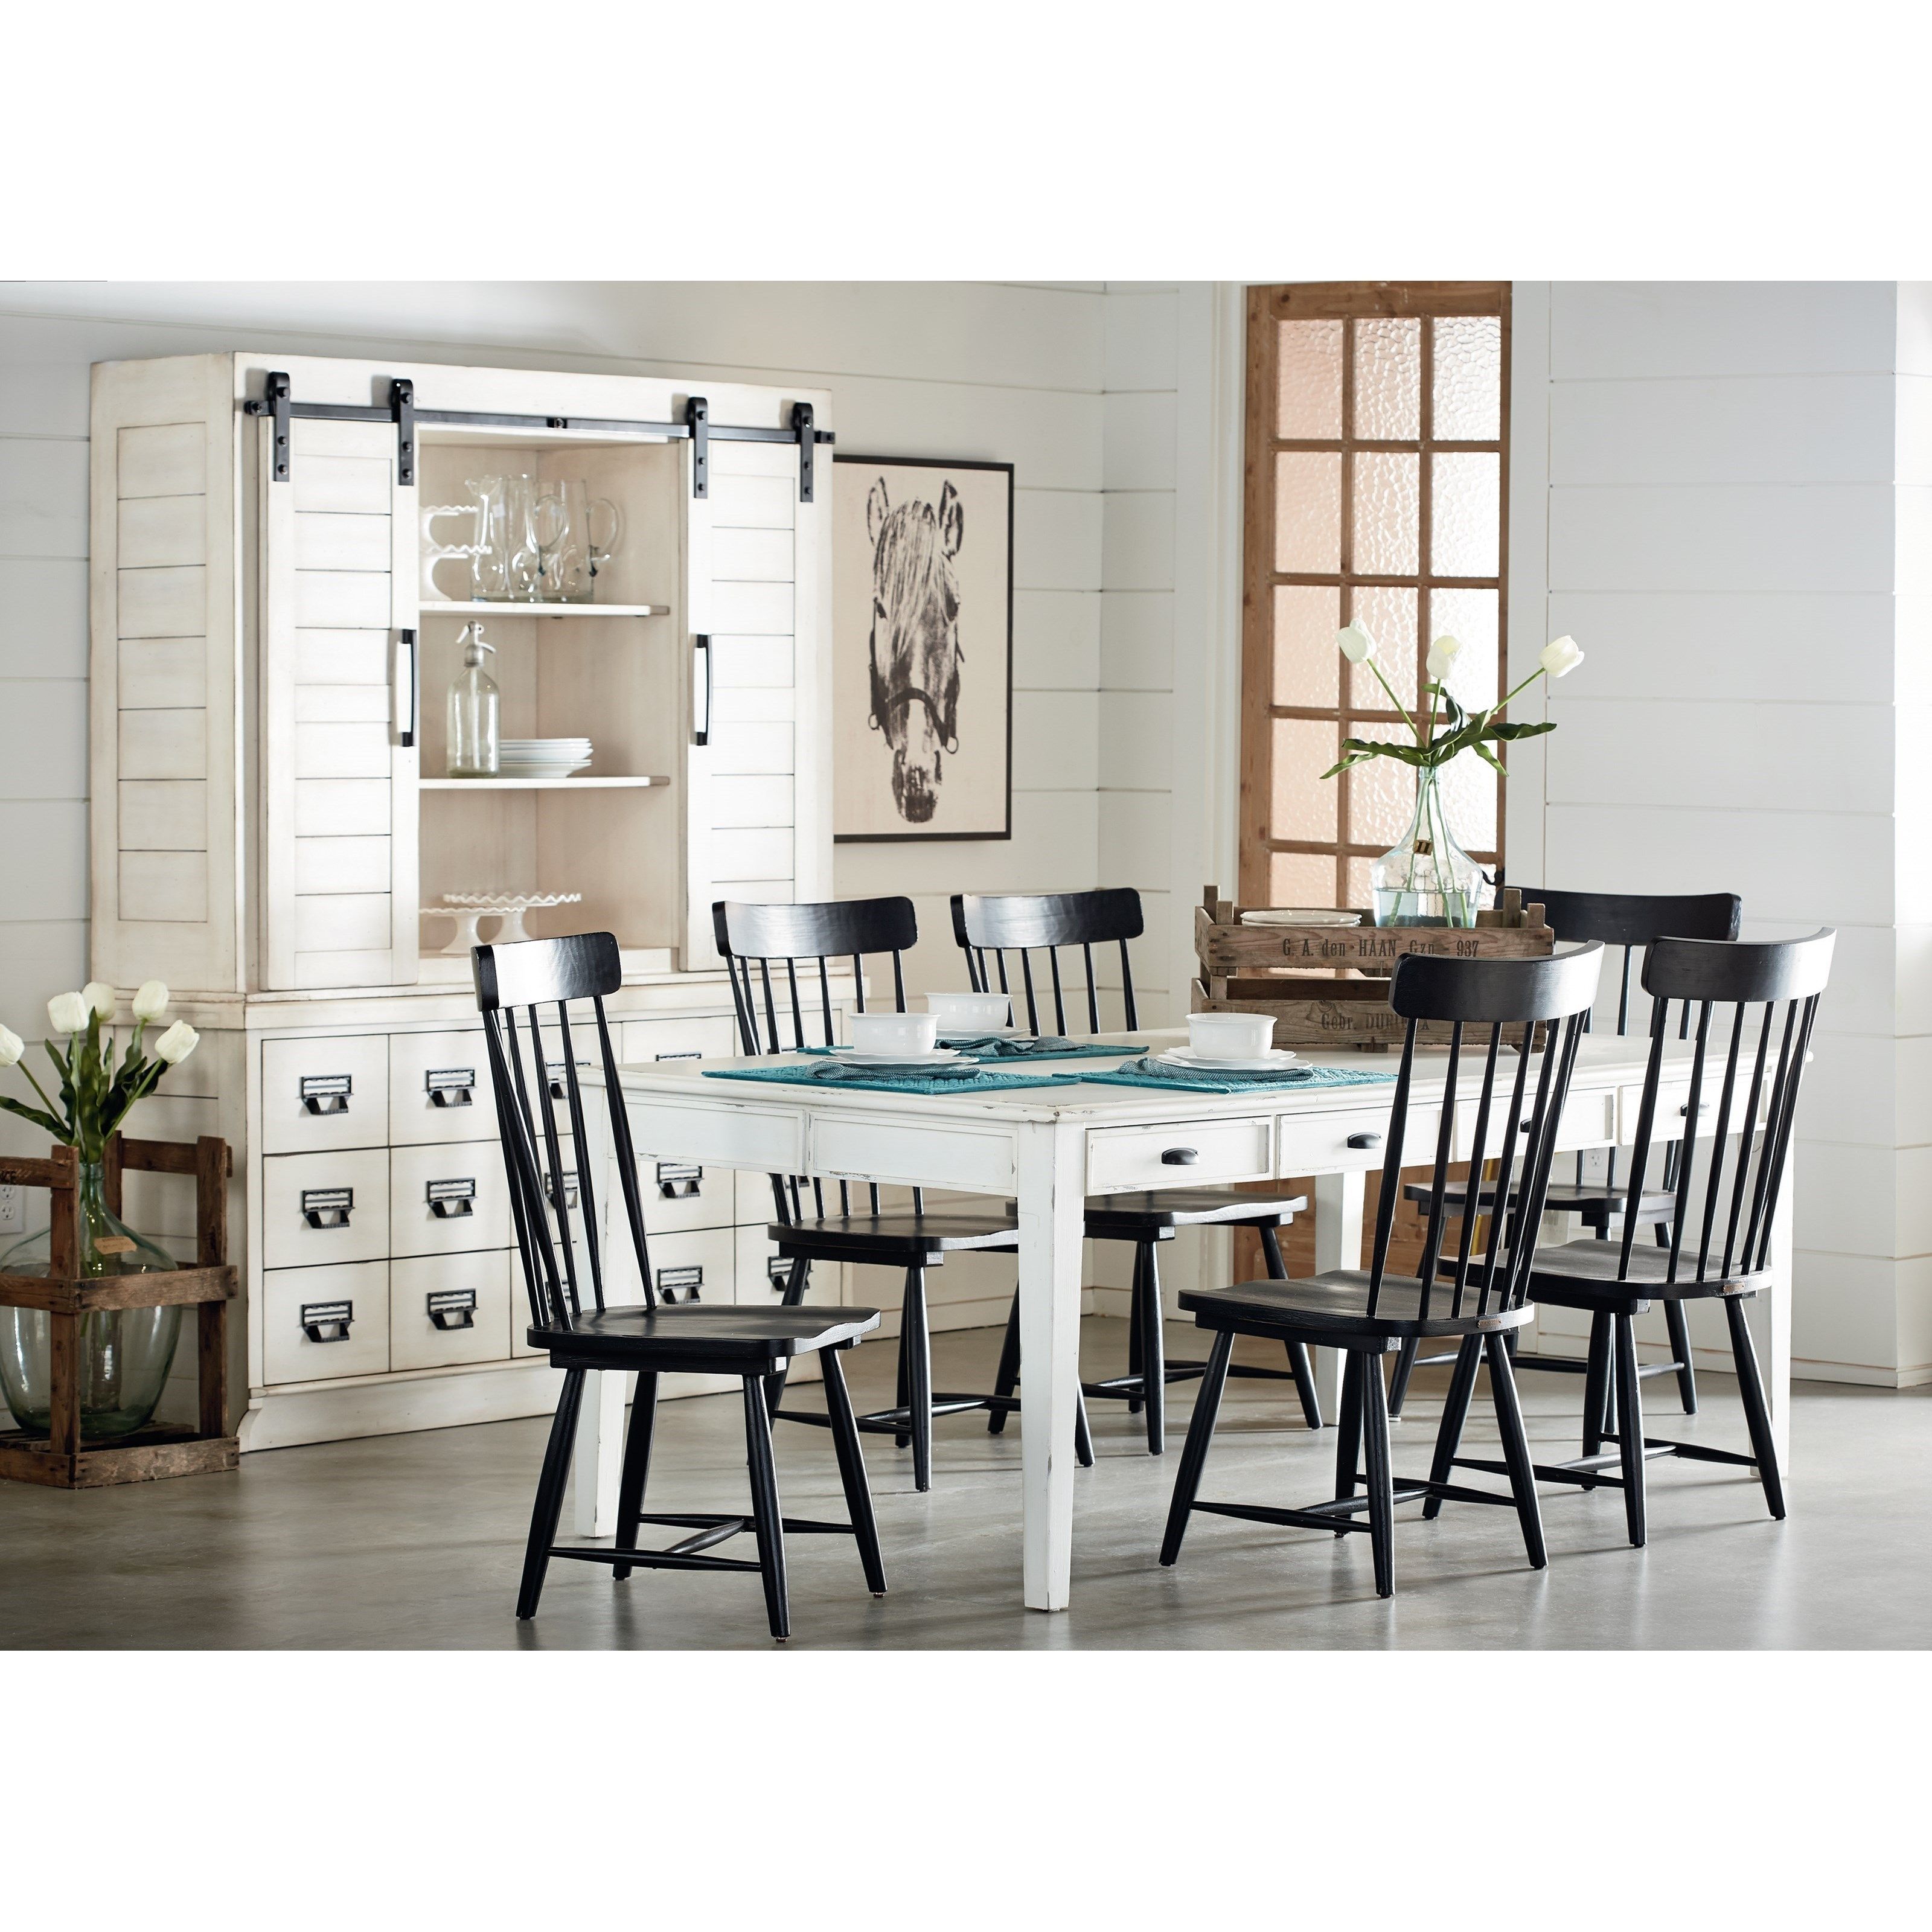 Kitchen Dining Group With 7' Tablemagnolia Homejoanna Gaines Throughout Recent Magnolia Home Taper Turned Jo's White Gathering Tables (View 8 of 20)